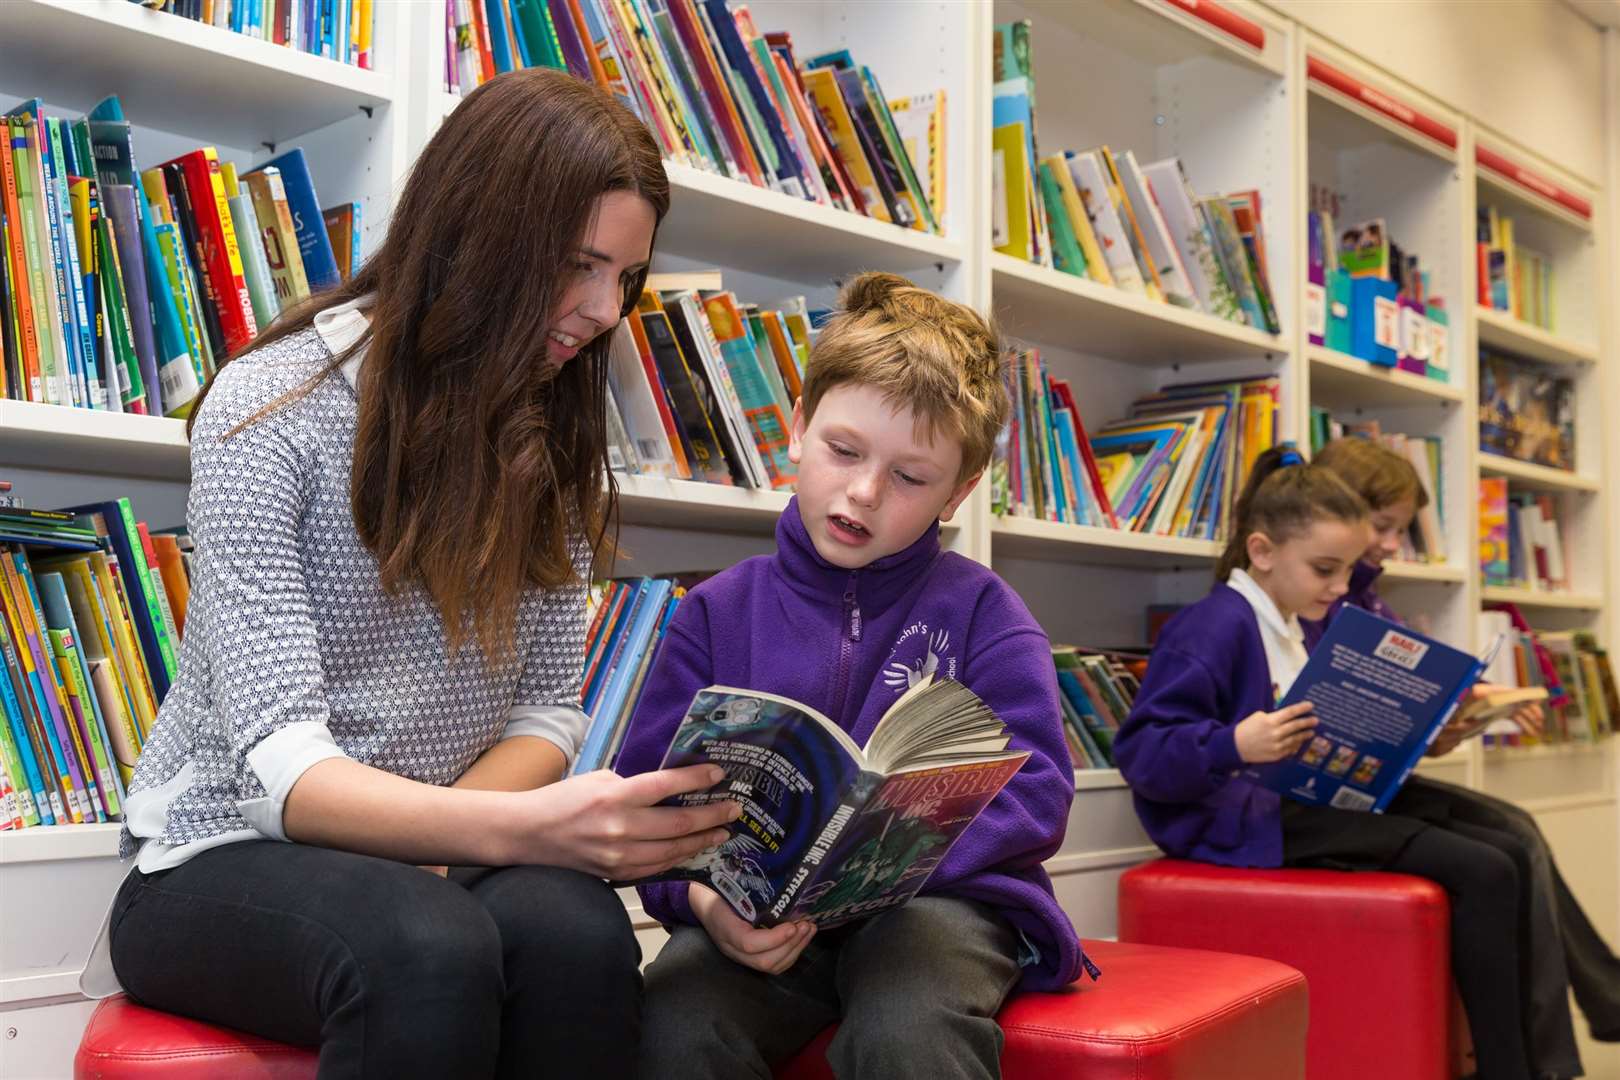 Coram Beanstalk are urging parents not to put pressure on their children when it comes to catching up with reading. Picture: Martin Apps